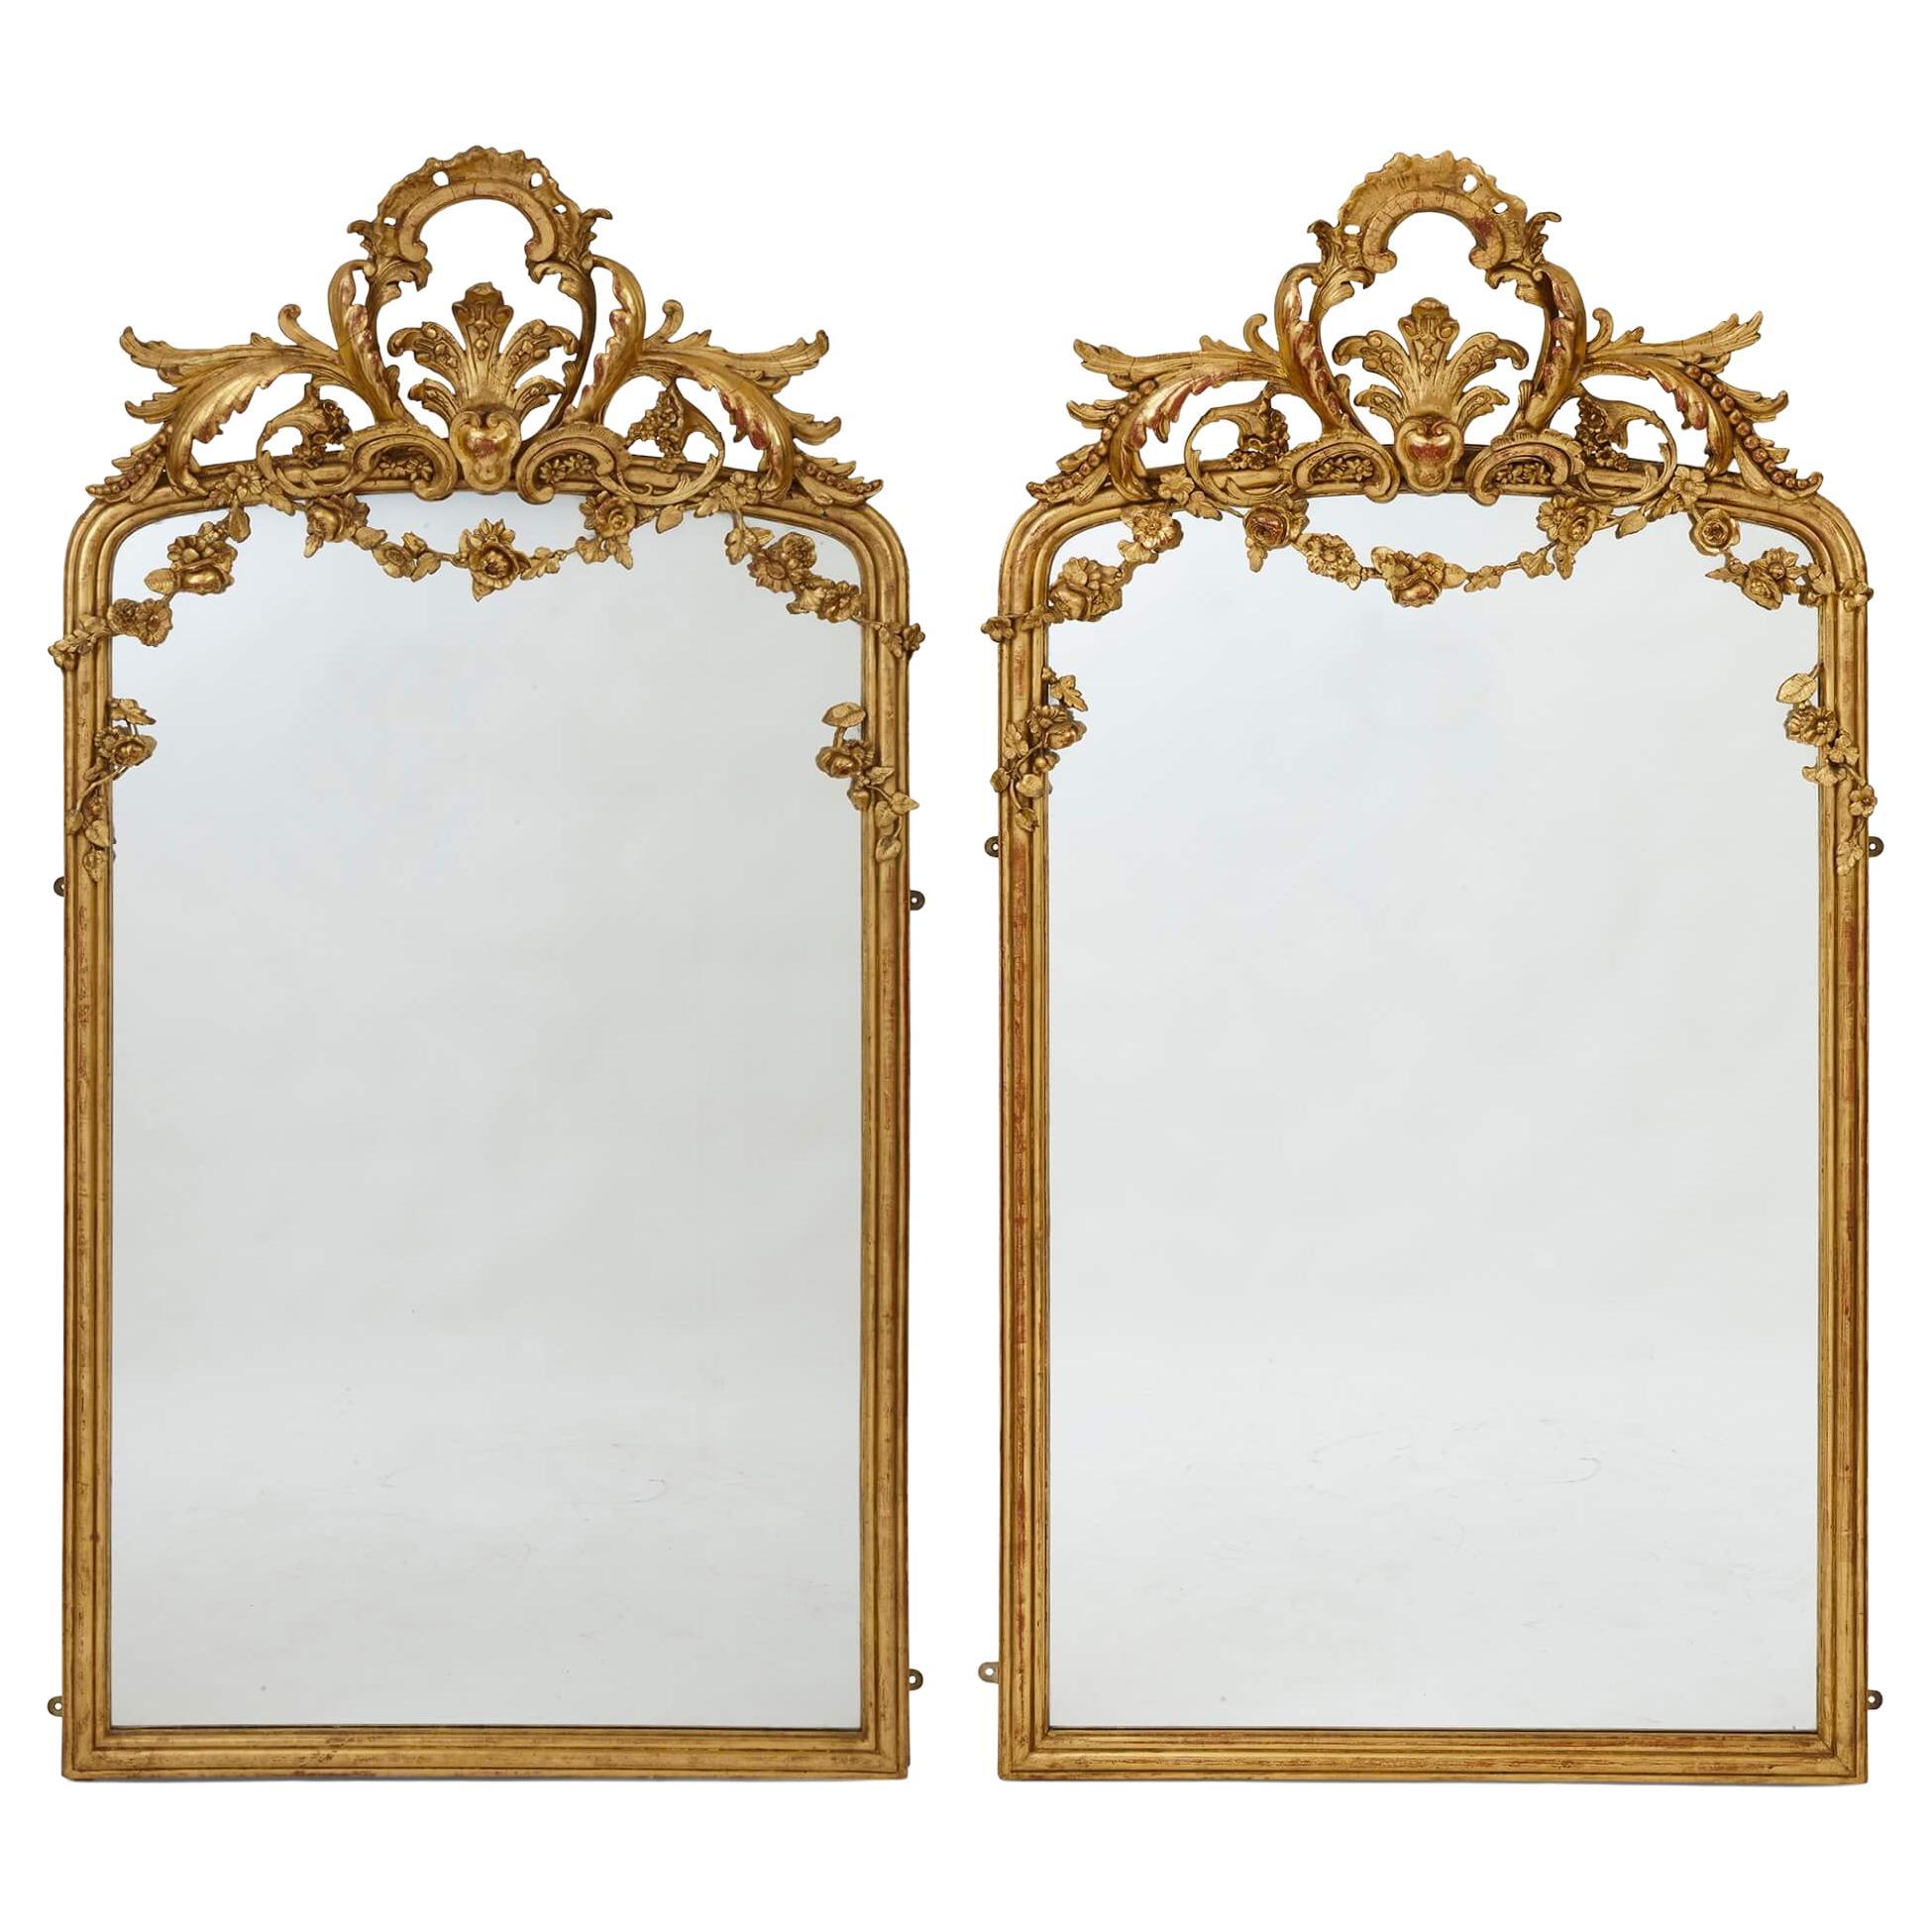 Pair of Large French Rococo Revival Giltwood Wall Mirrors